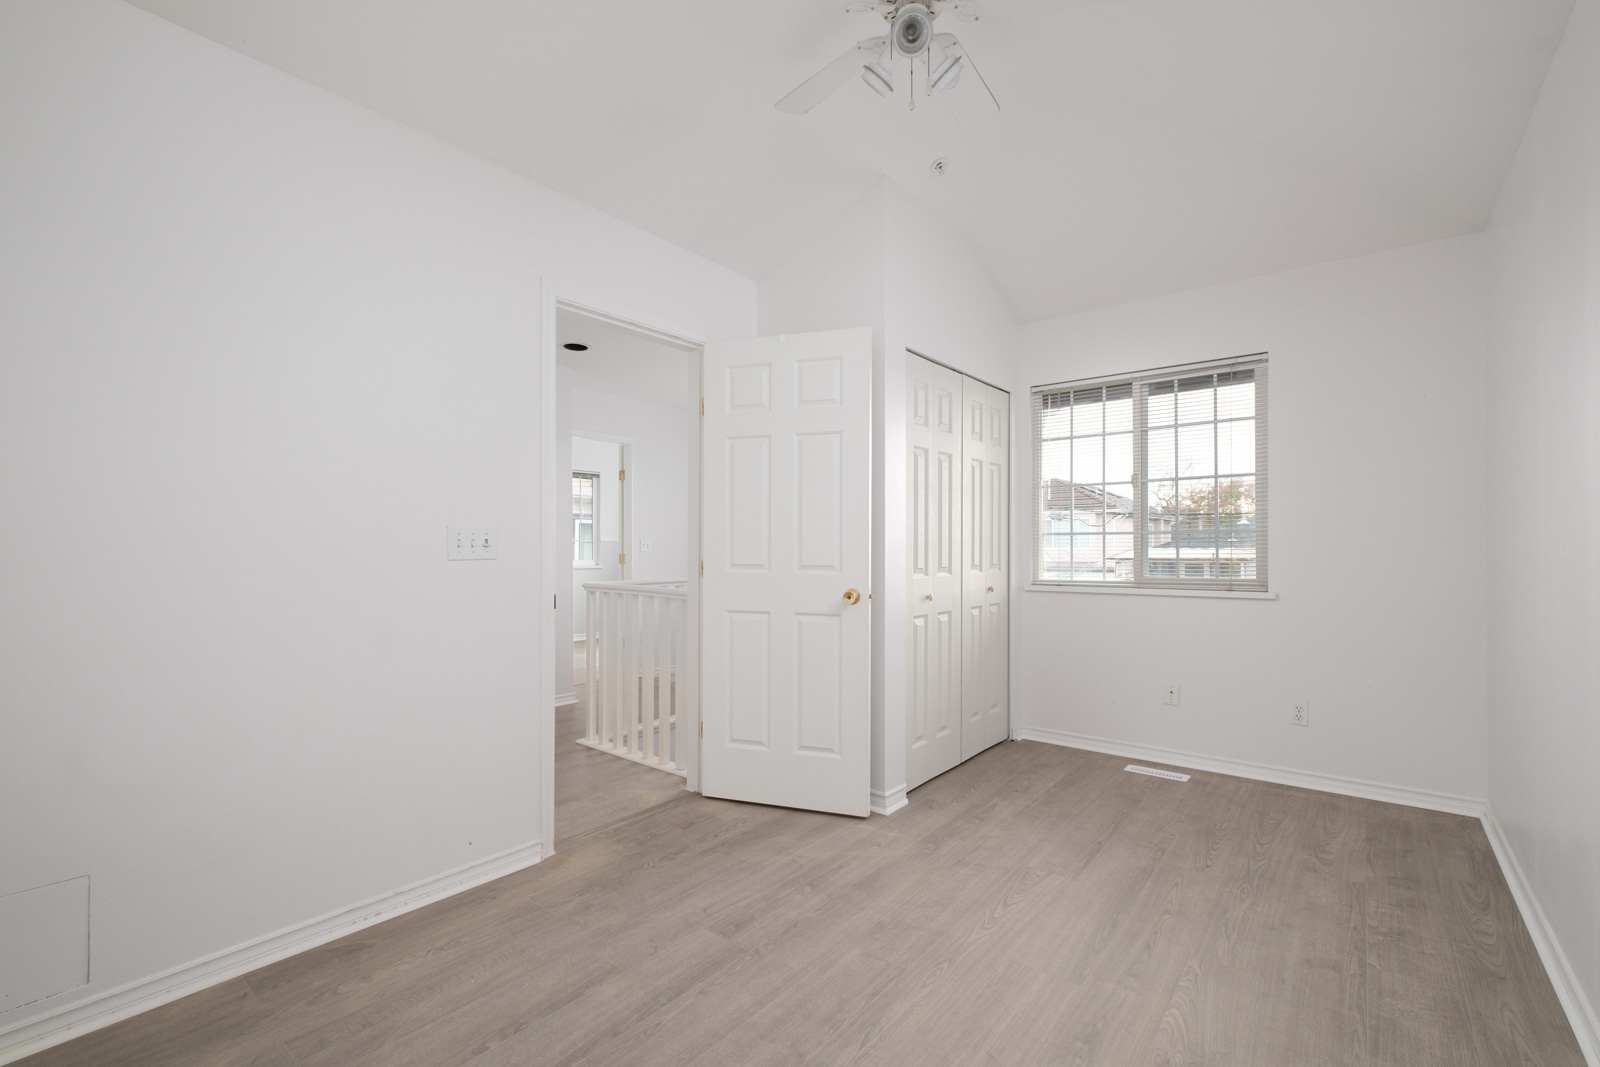 room with white walls and door on left and window in background in rental house managed by birds nest properties